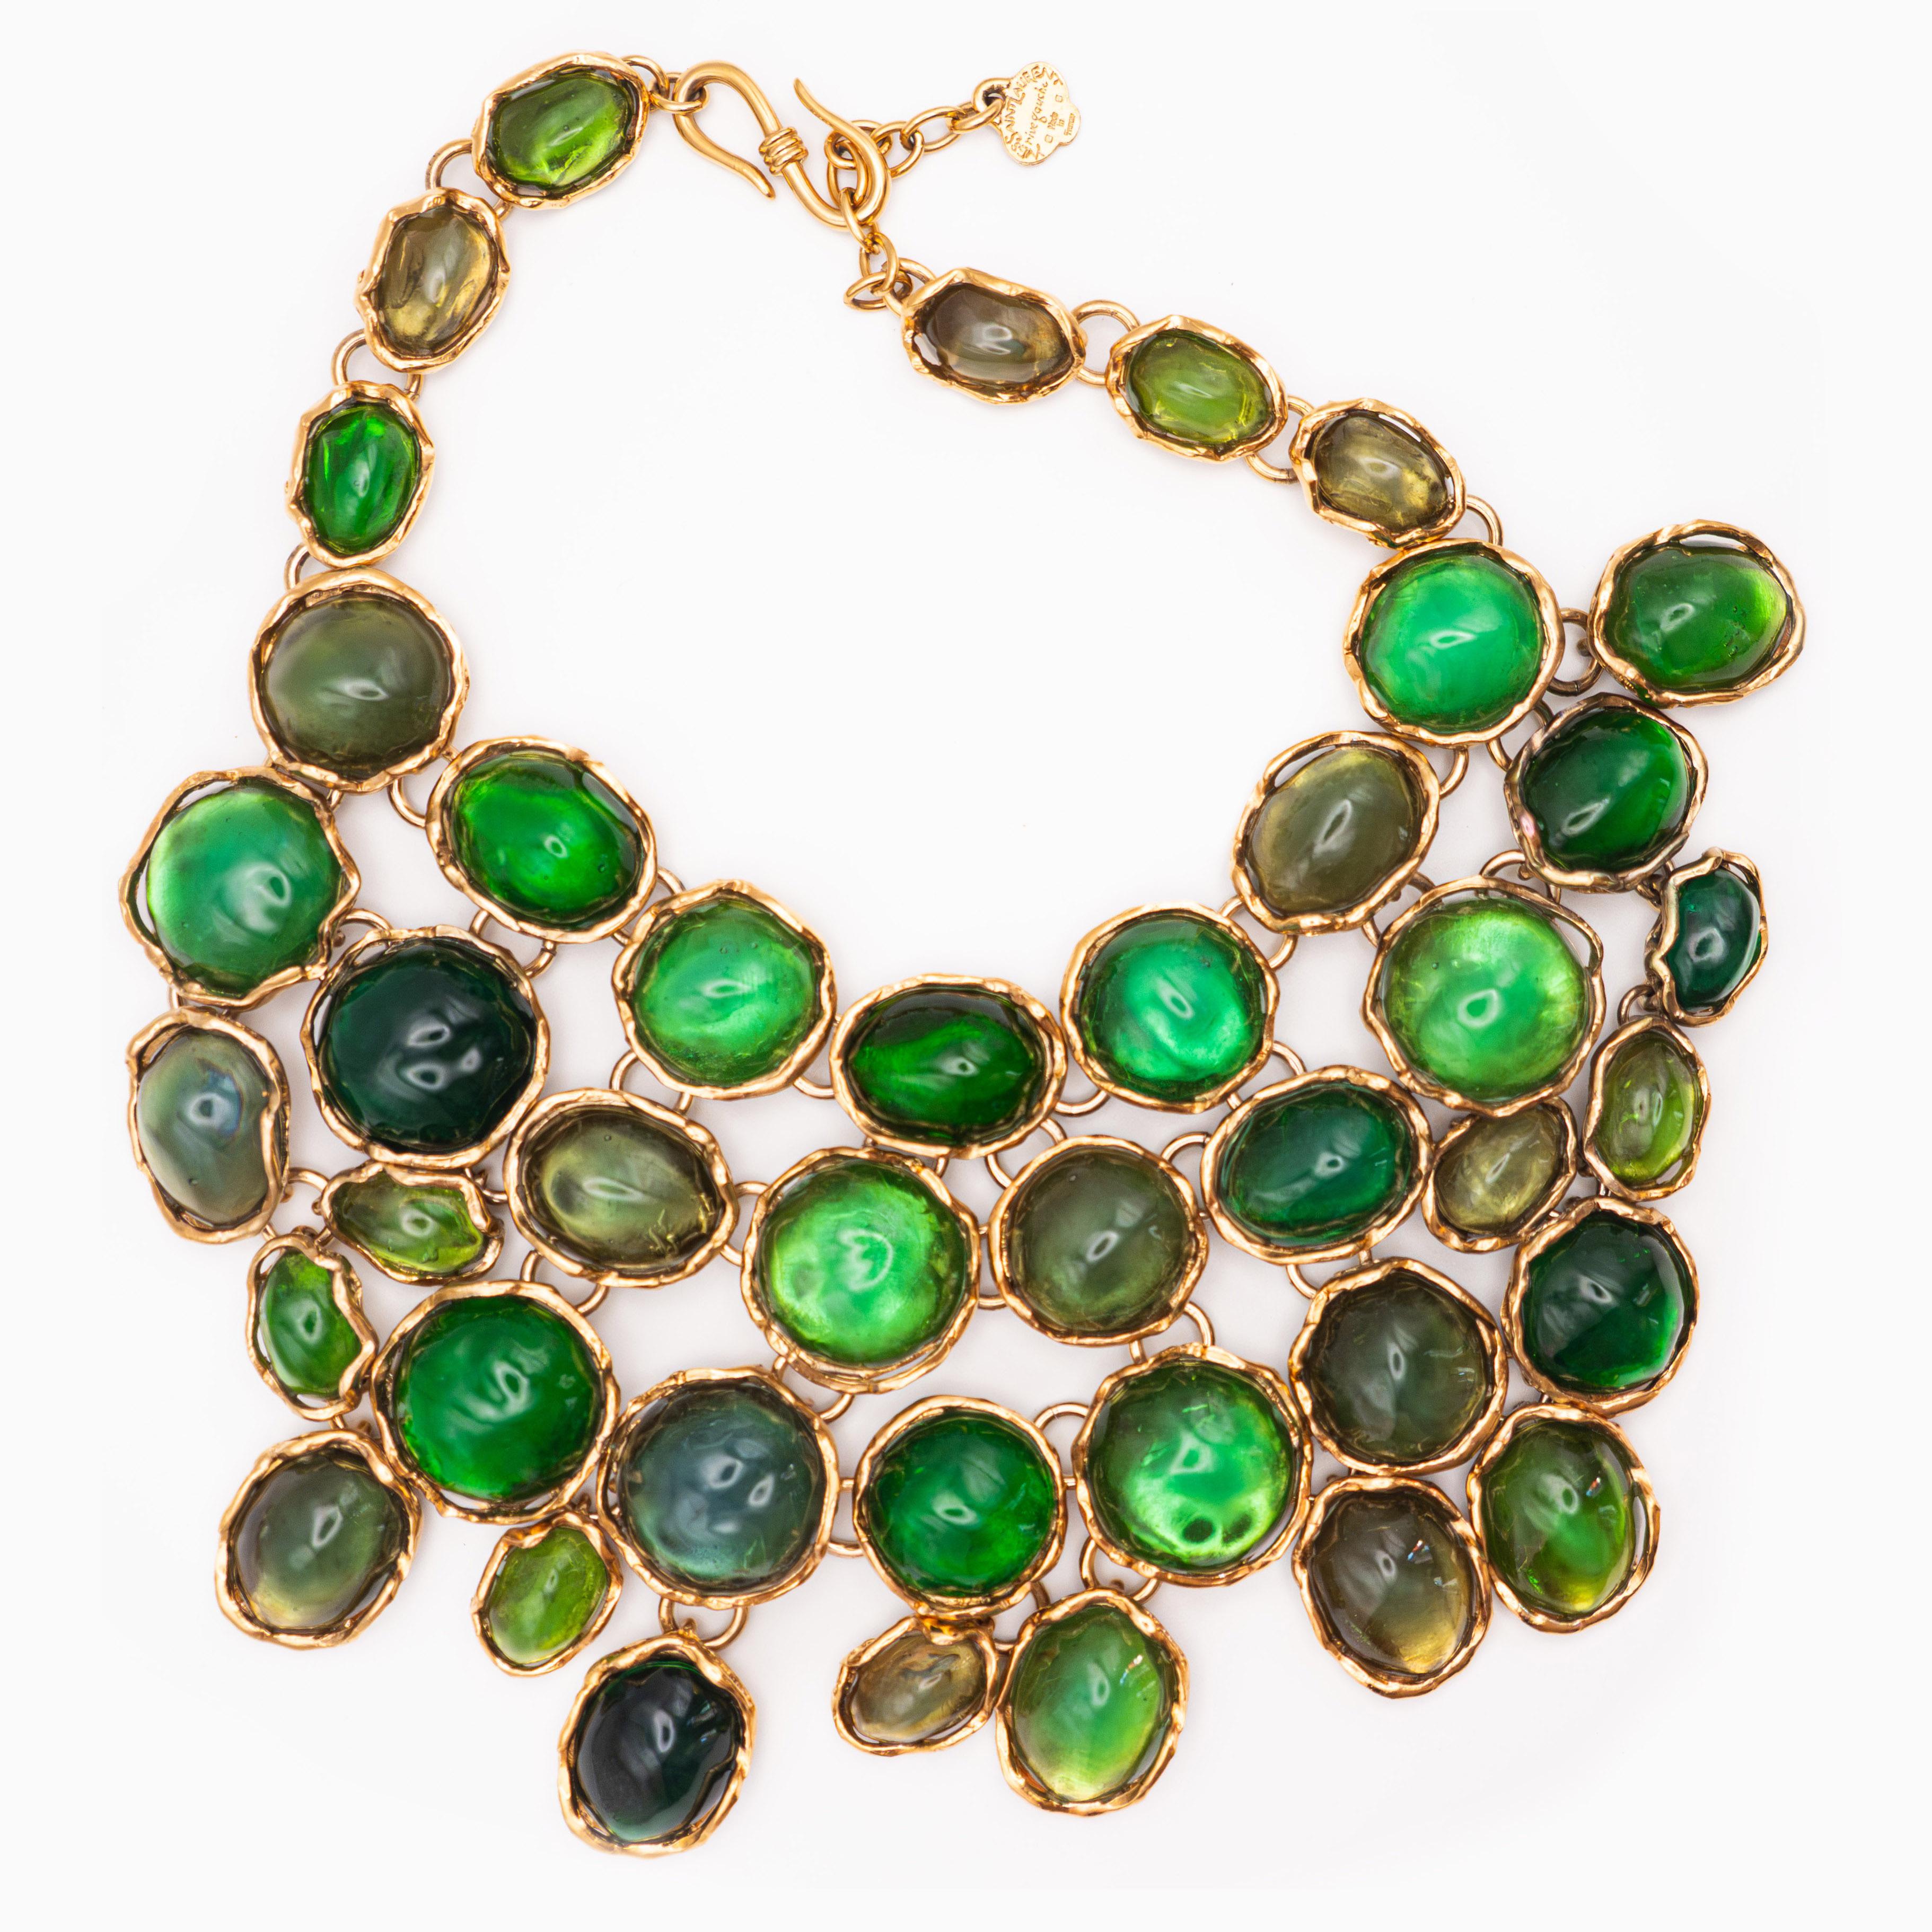 Yves Saint Laurent Gemstone Necklace by Loulou de la Falaise and Goossens from 1989. Dramatic oversized cast glass necklace with huge resin gemstones in gilt bronze. Adjustable hook closure.
23 cm